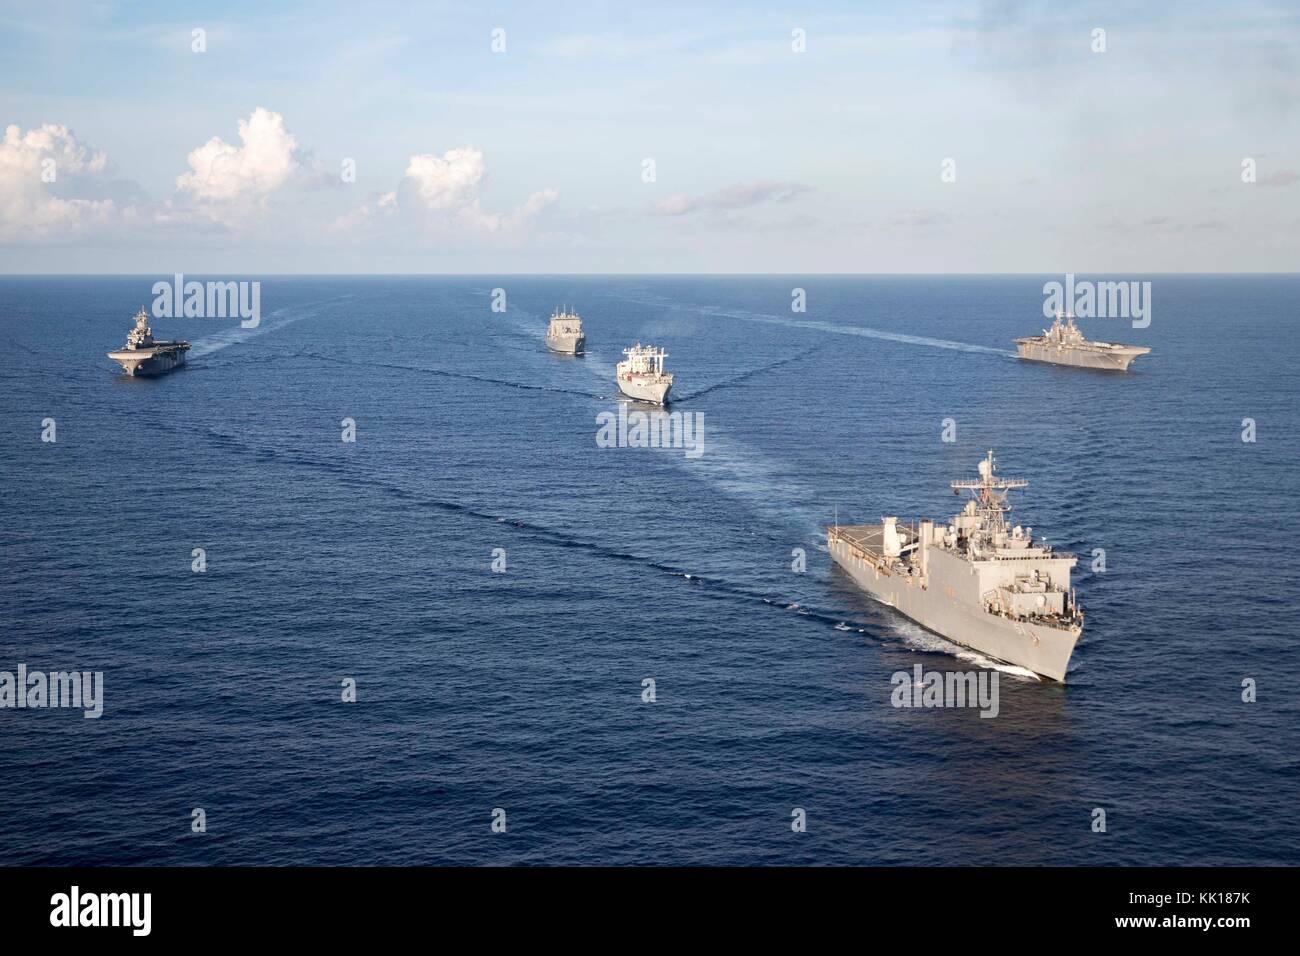 The U.S. Navy Harpers Ferry-class amphibious dock landing ship USS Oak Hill steams in formation with U.S. ships September 19, 2017 in the Caribbean Sea. The ships are en route to help with relief efforts in the aftermath of Hurricane Irma. (photo by MCS3 Dana D. Legg  via Planetpix) Stock Photo